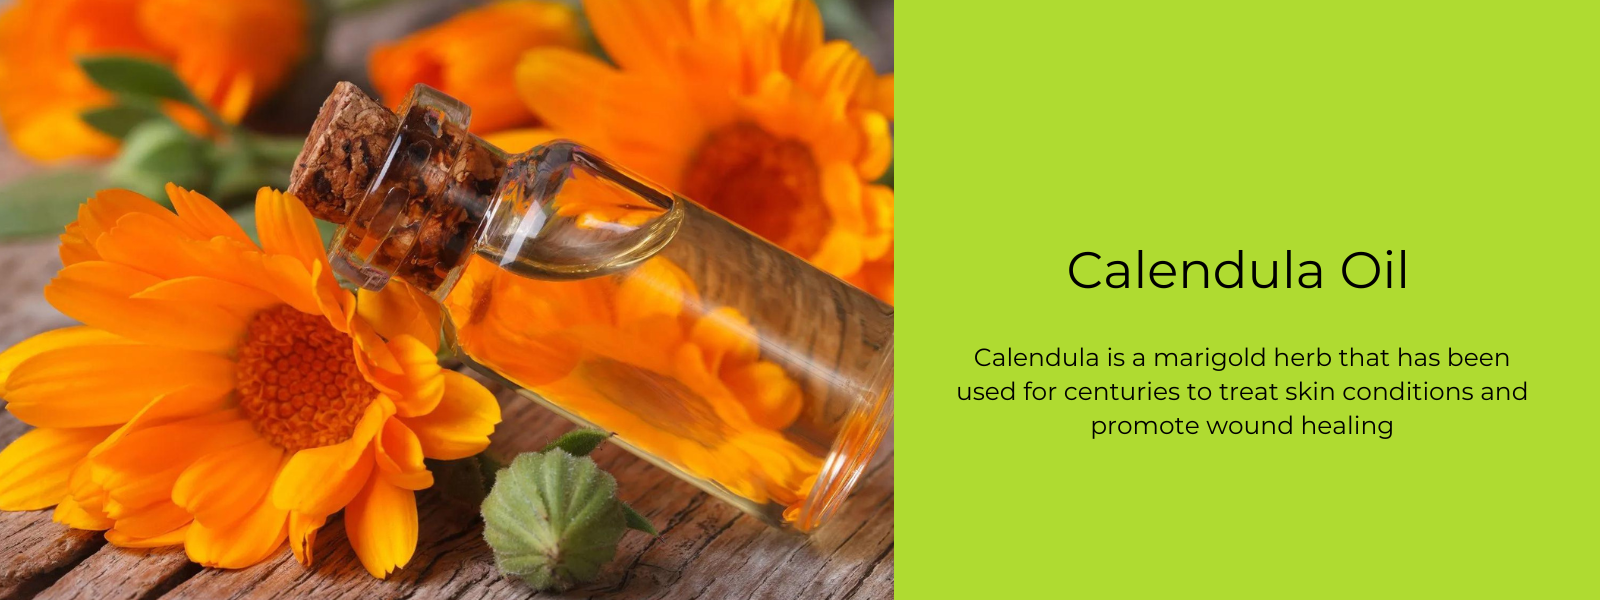 Calendula Oil - Health Benefits, Uses and Important Facts